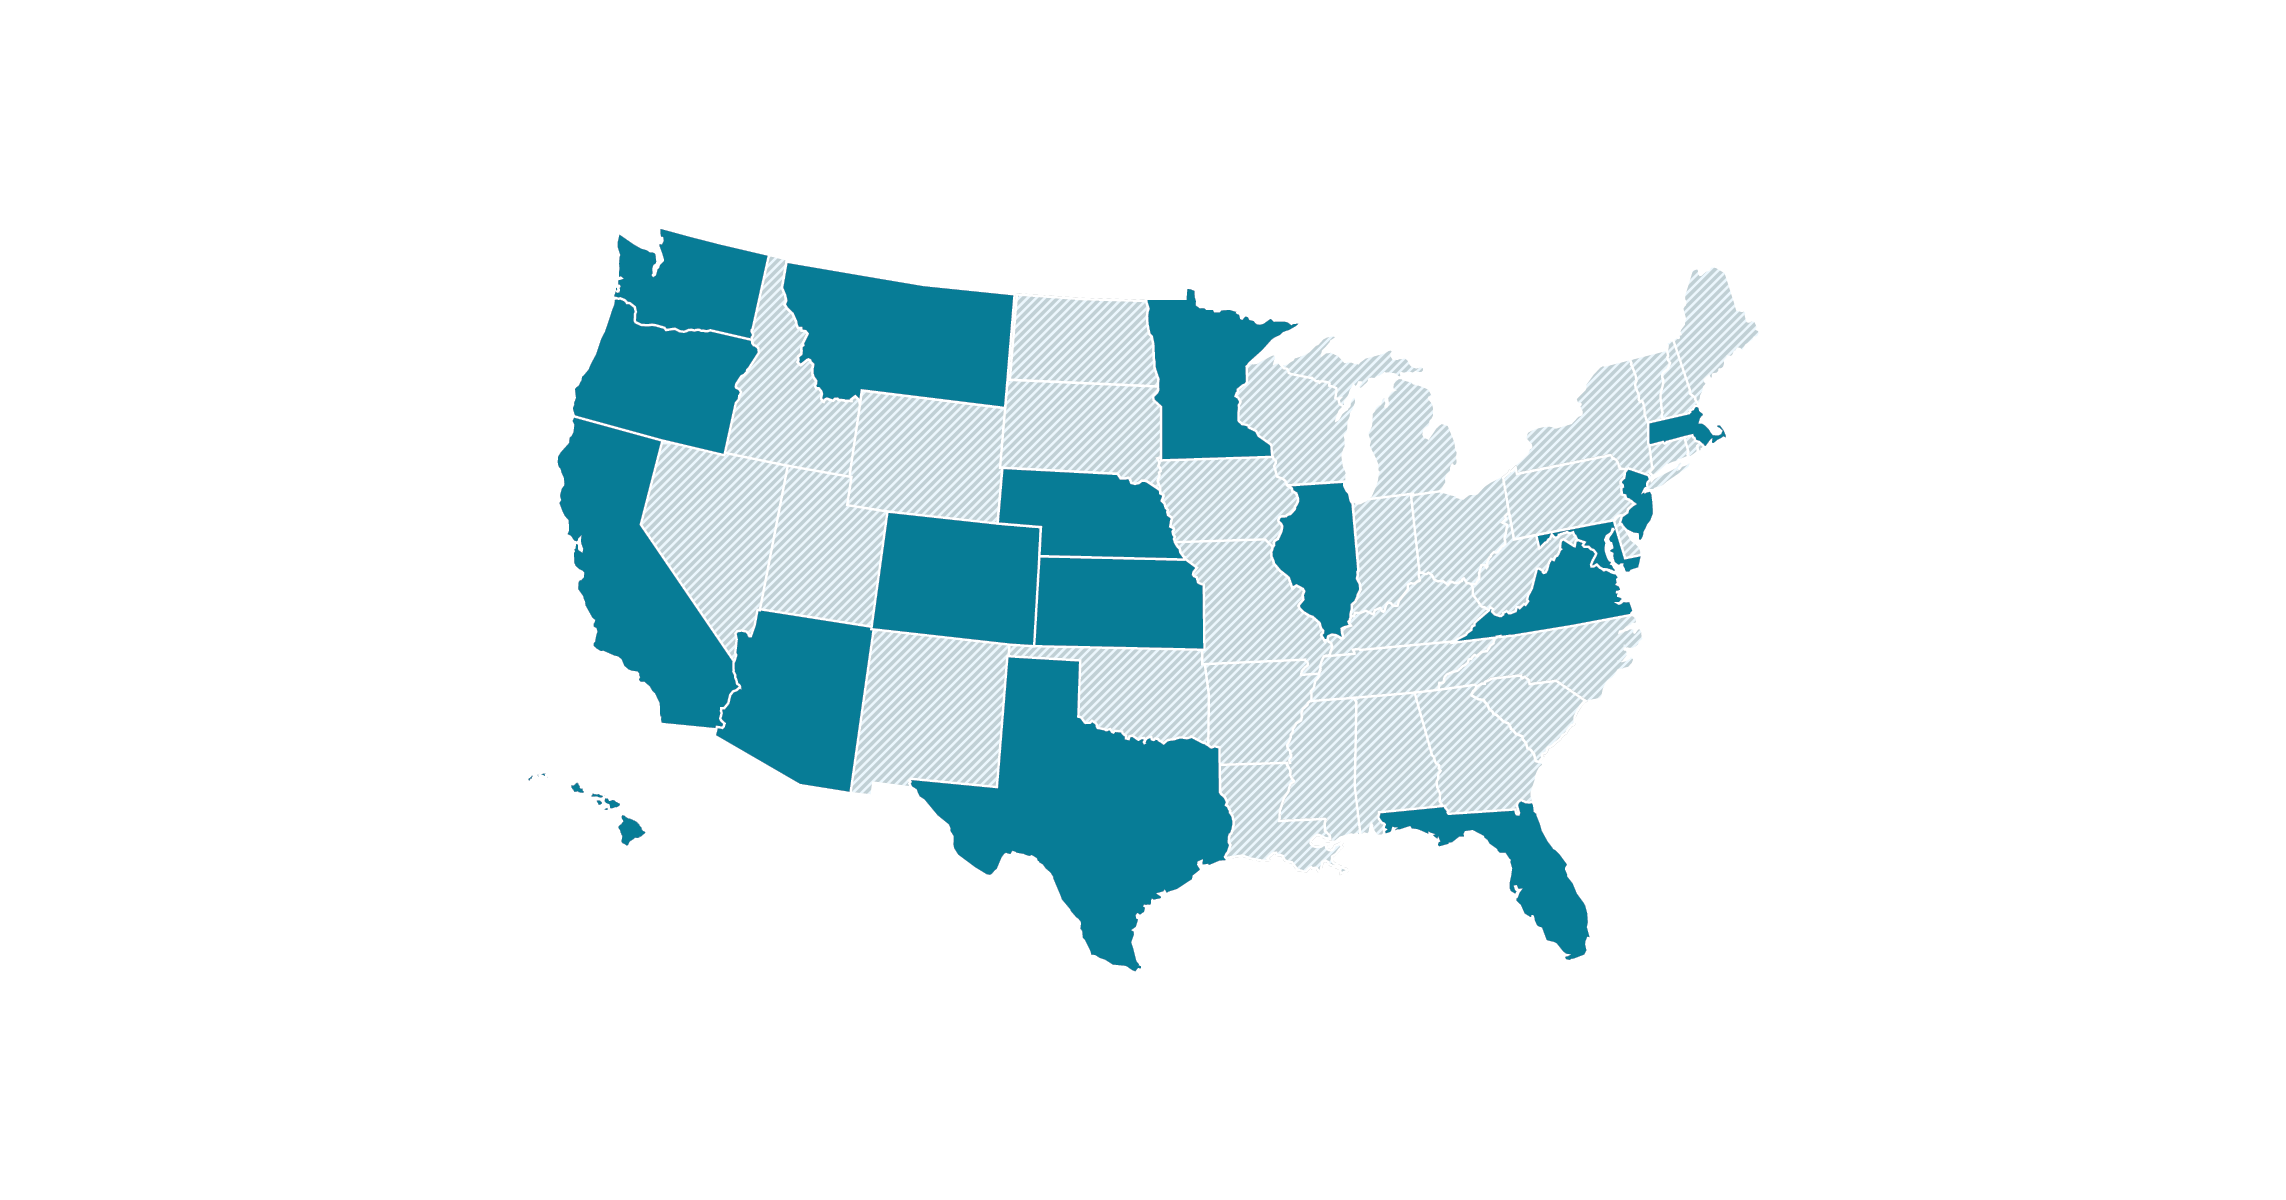 A grey map of the US with some states highlighted in blue. The states highlighted in blue are where KJ has office locations.